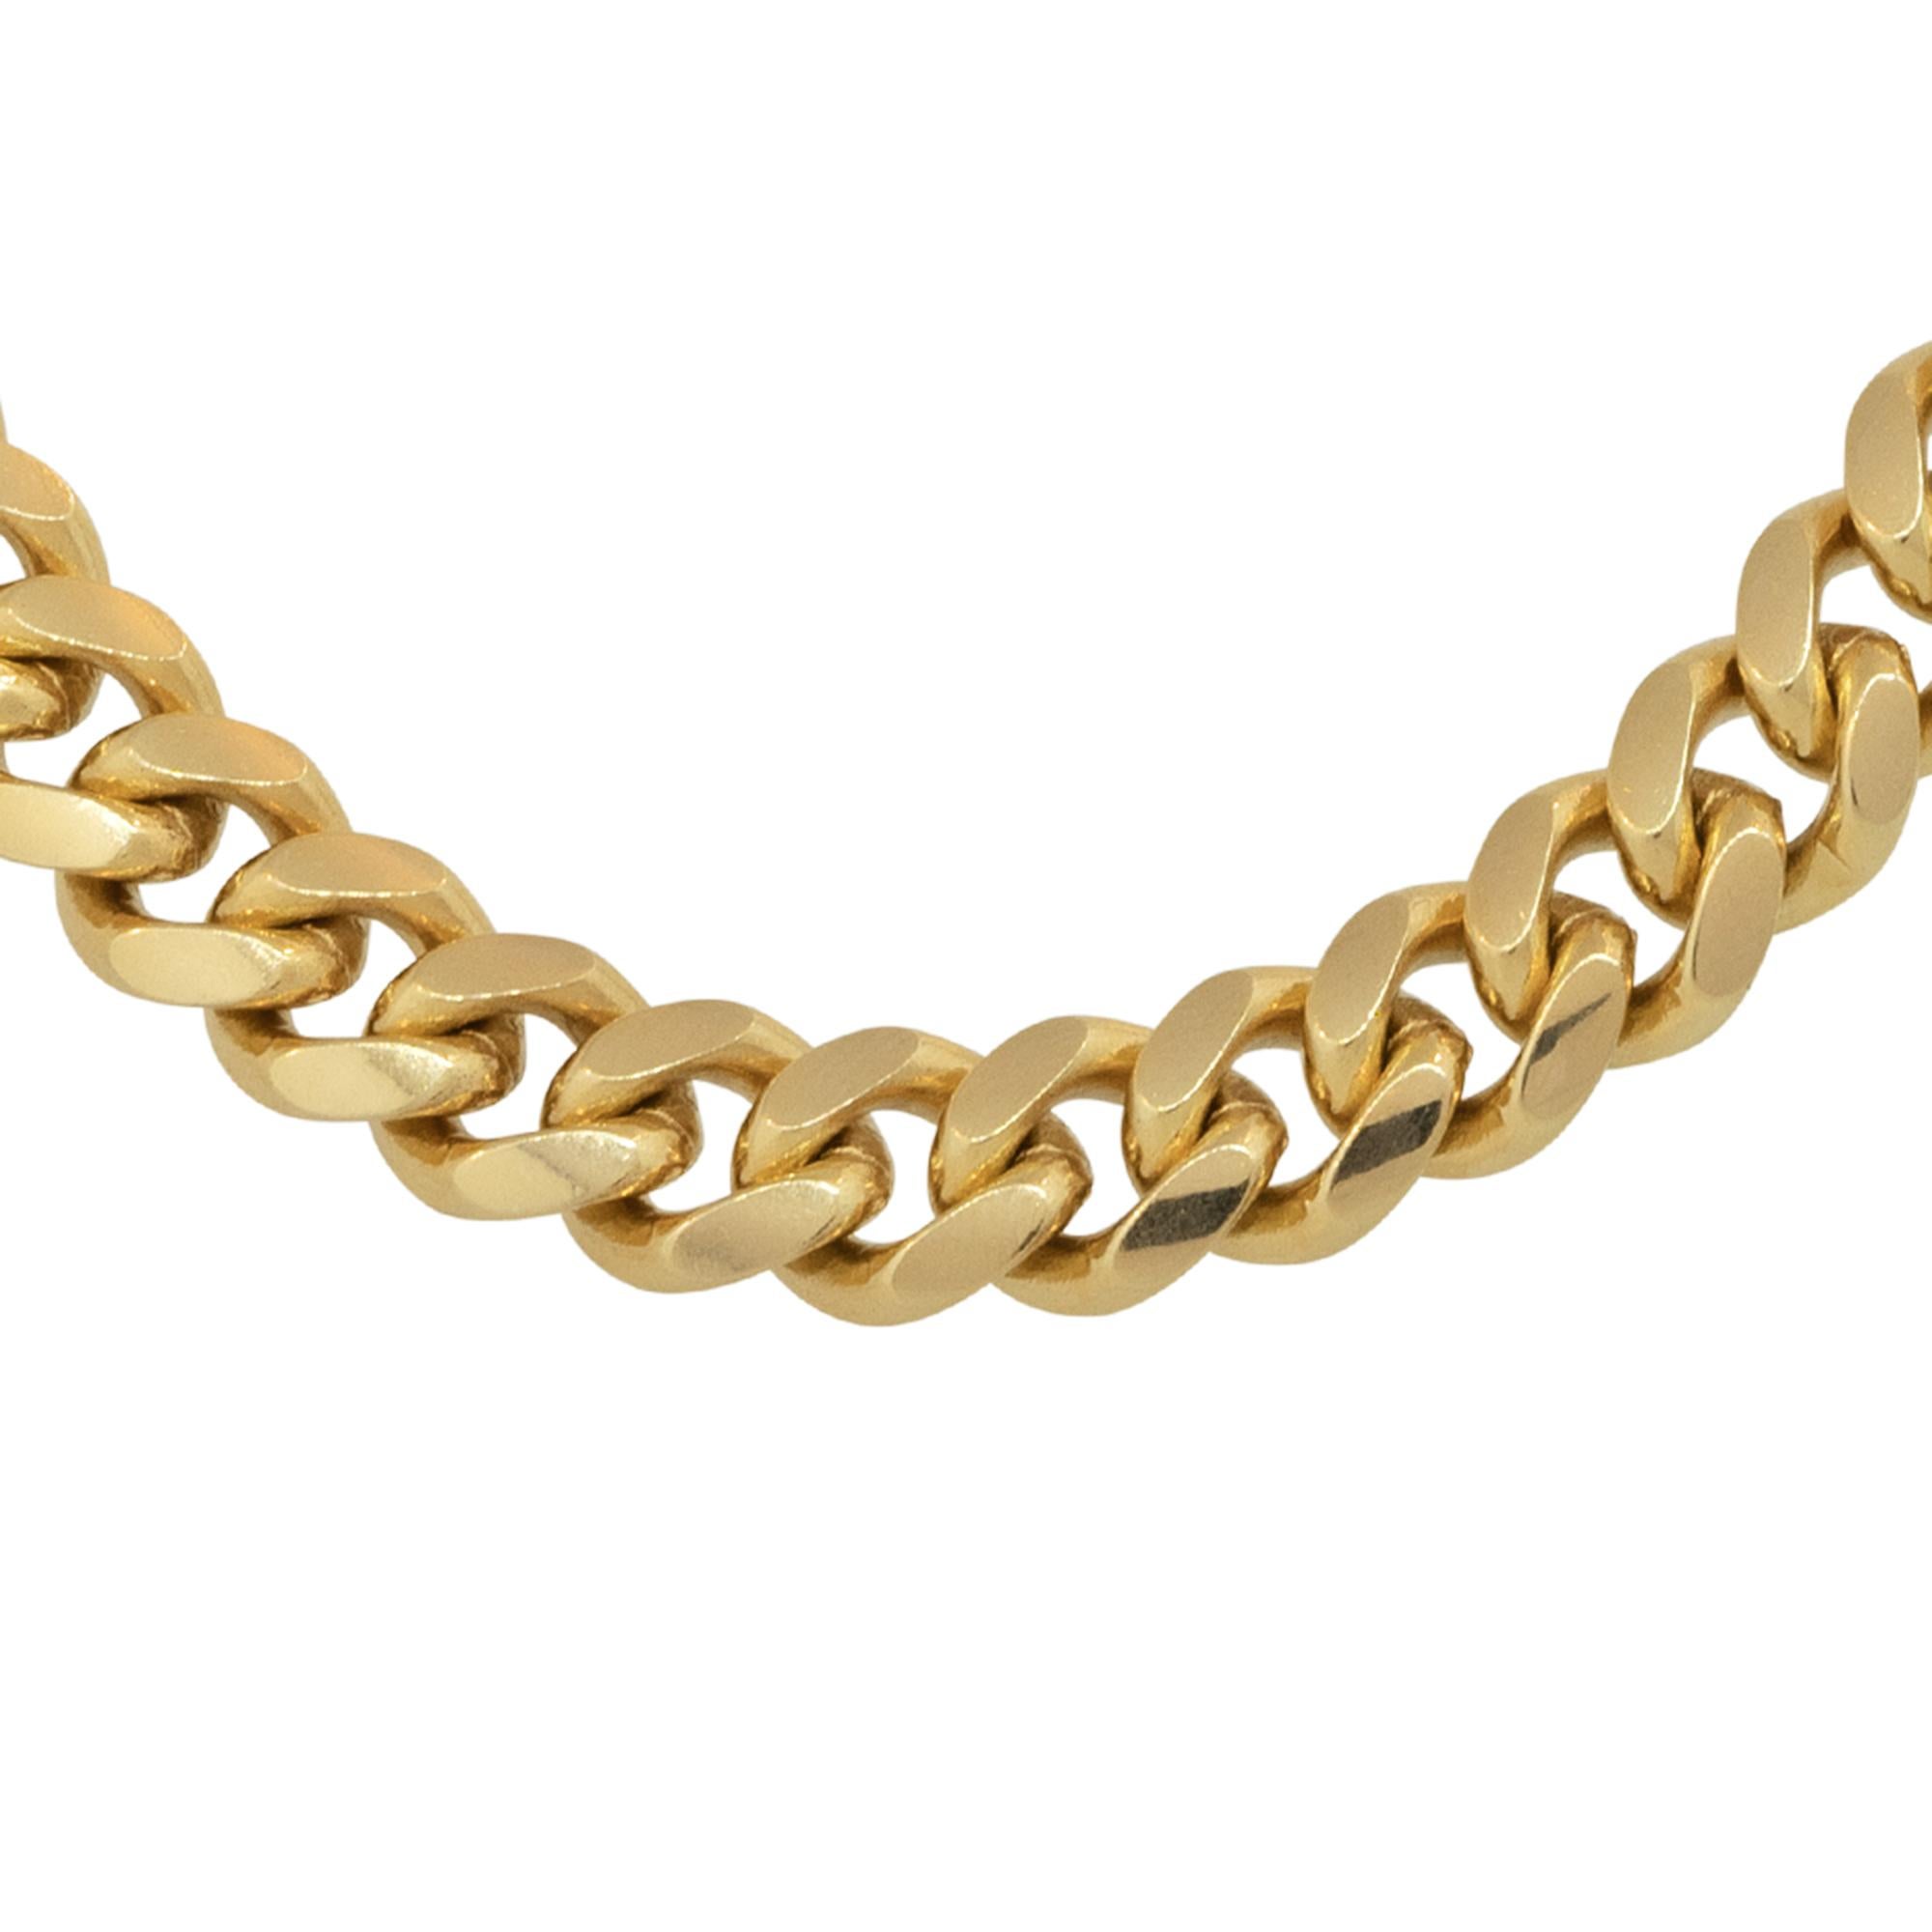 14k Yellow Gold 24″ Men's Miami Cuban Link Chain

Material: 14k Yellow Gold
Measurements: Necklace Measures 24″ in Length and 7.9mm in Thickness
Fastening: Spring Ring Clasp
Item Weight: 101.1g (65dwt)
Additional Details: This item comes with a